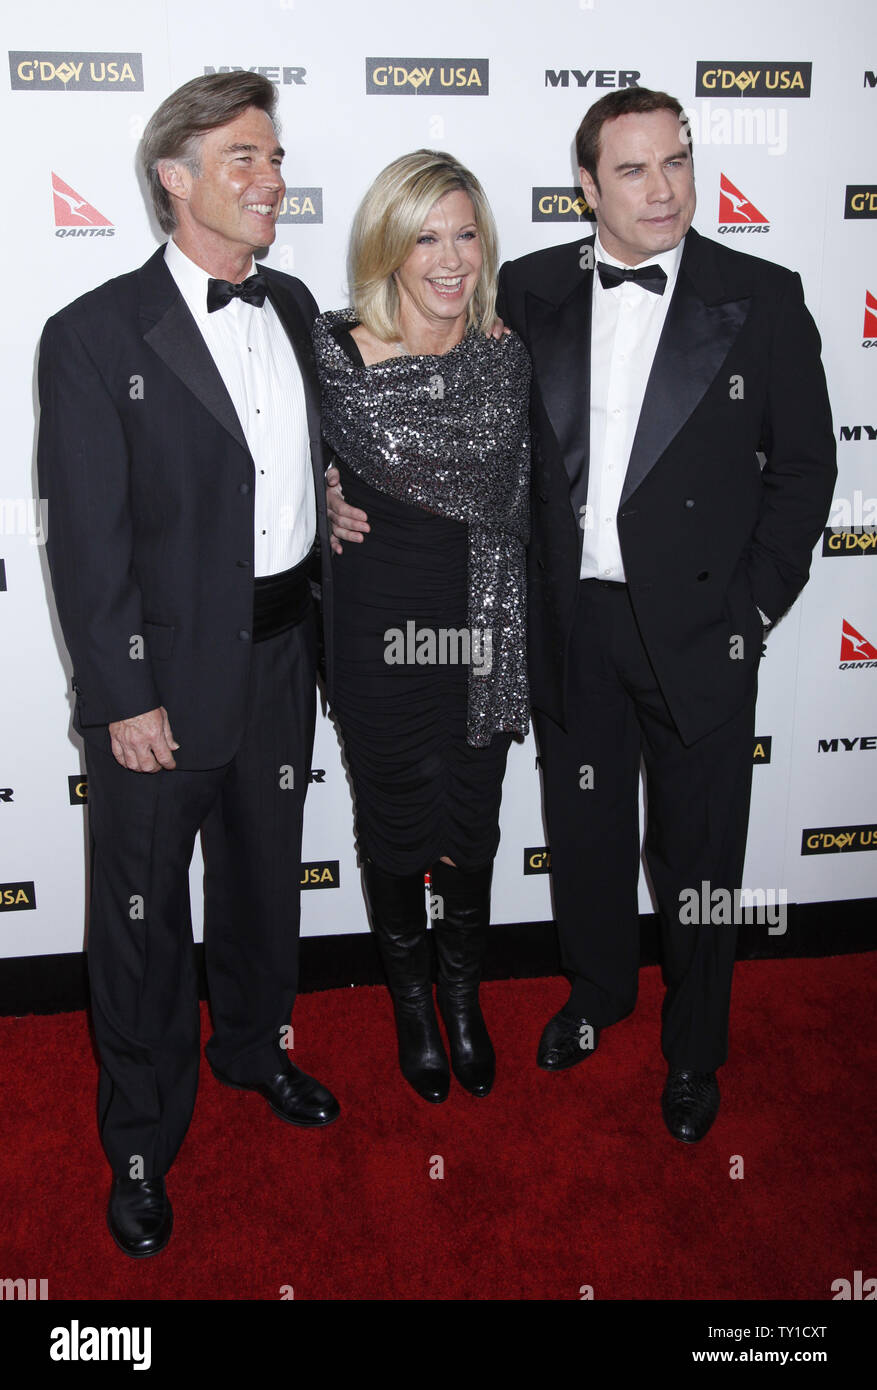 Olivia Newton-John (C), her husband John Easterling (L) and John Travolta arrive on the red carpet at the G'Day USA 2010 Los Angeles Black Tie Gala in Hollywood on January 16, 2010.  The event honors high profile individuals for significant contributions to their industries and for excellence in promoting Australia in the United States.   (UPI/David Silpa) Stock Photo